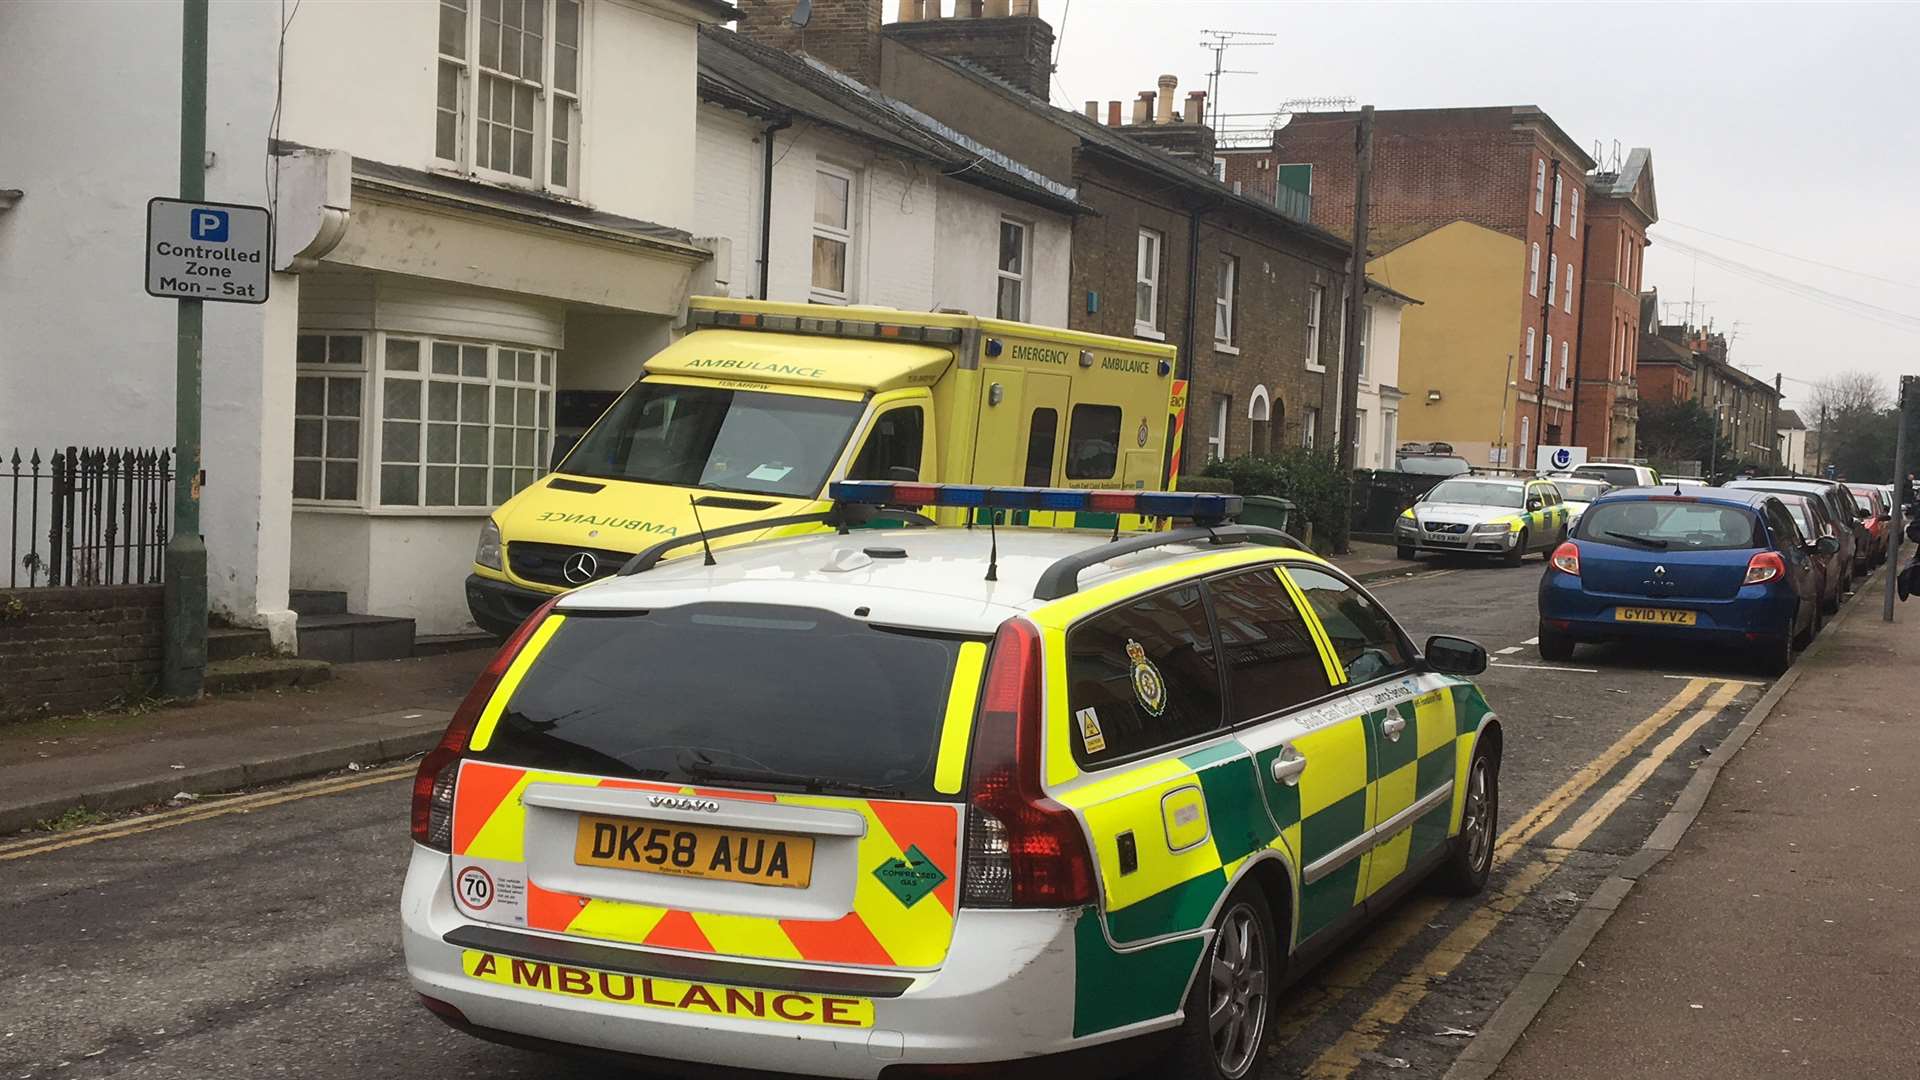 Emergency services at the scene in Marsham Street, Maidstone